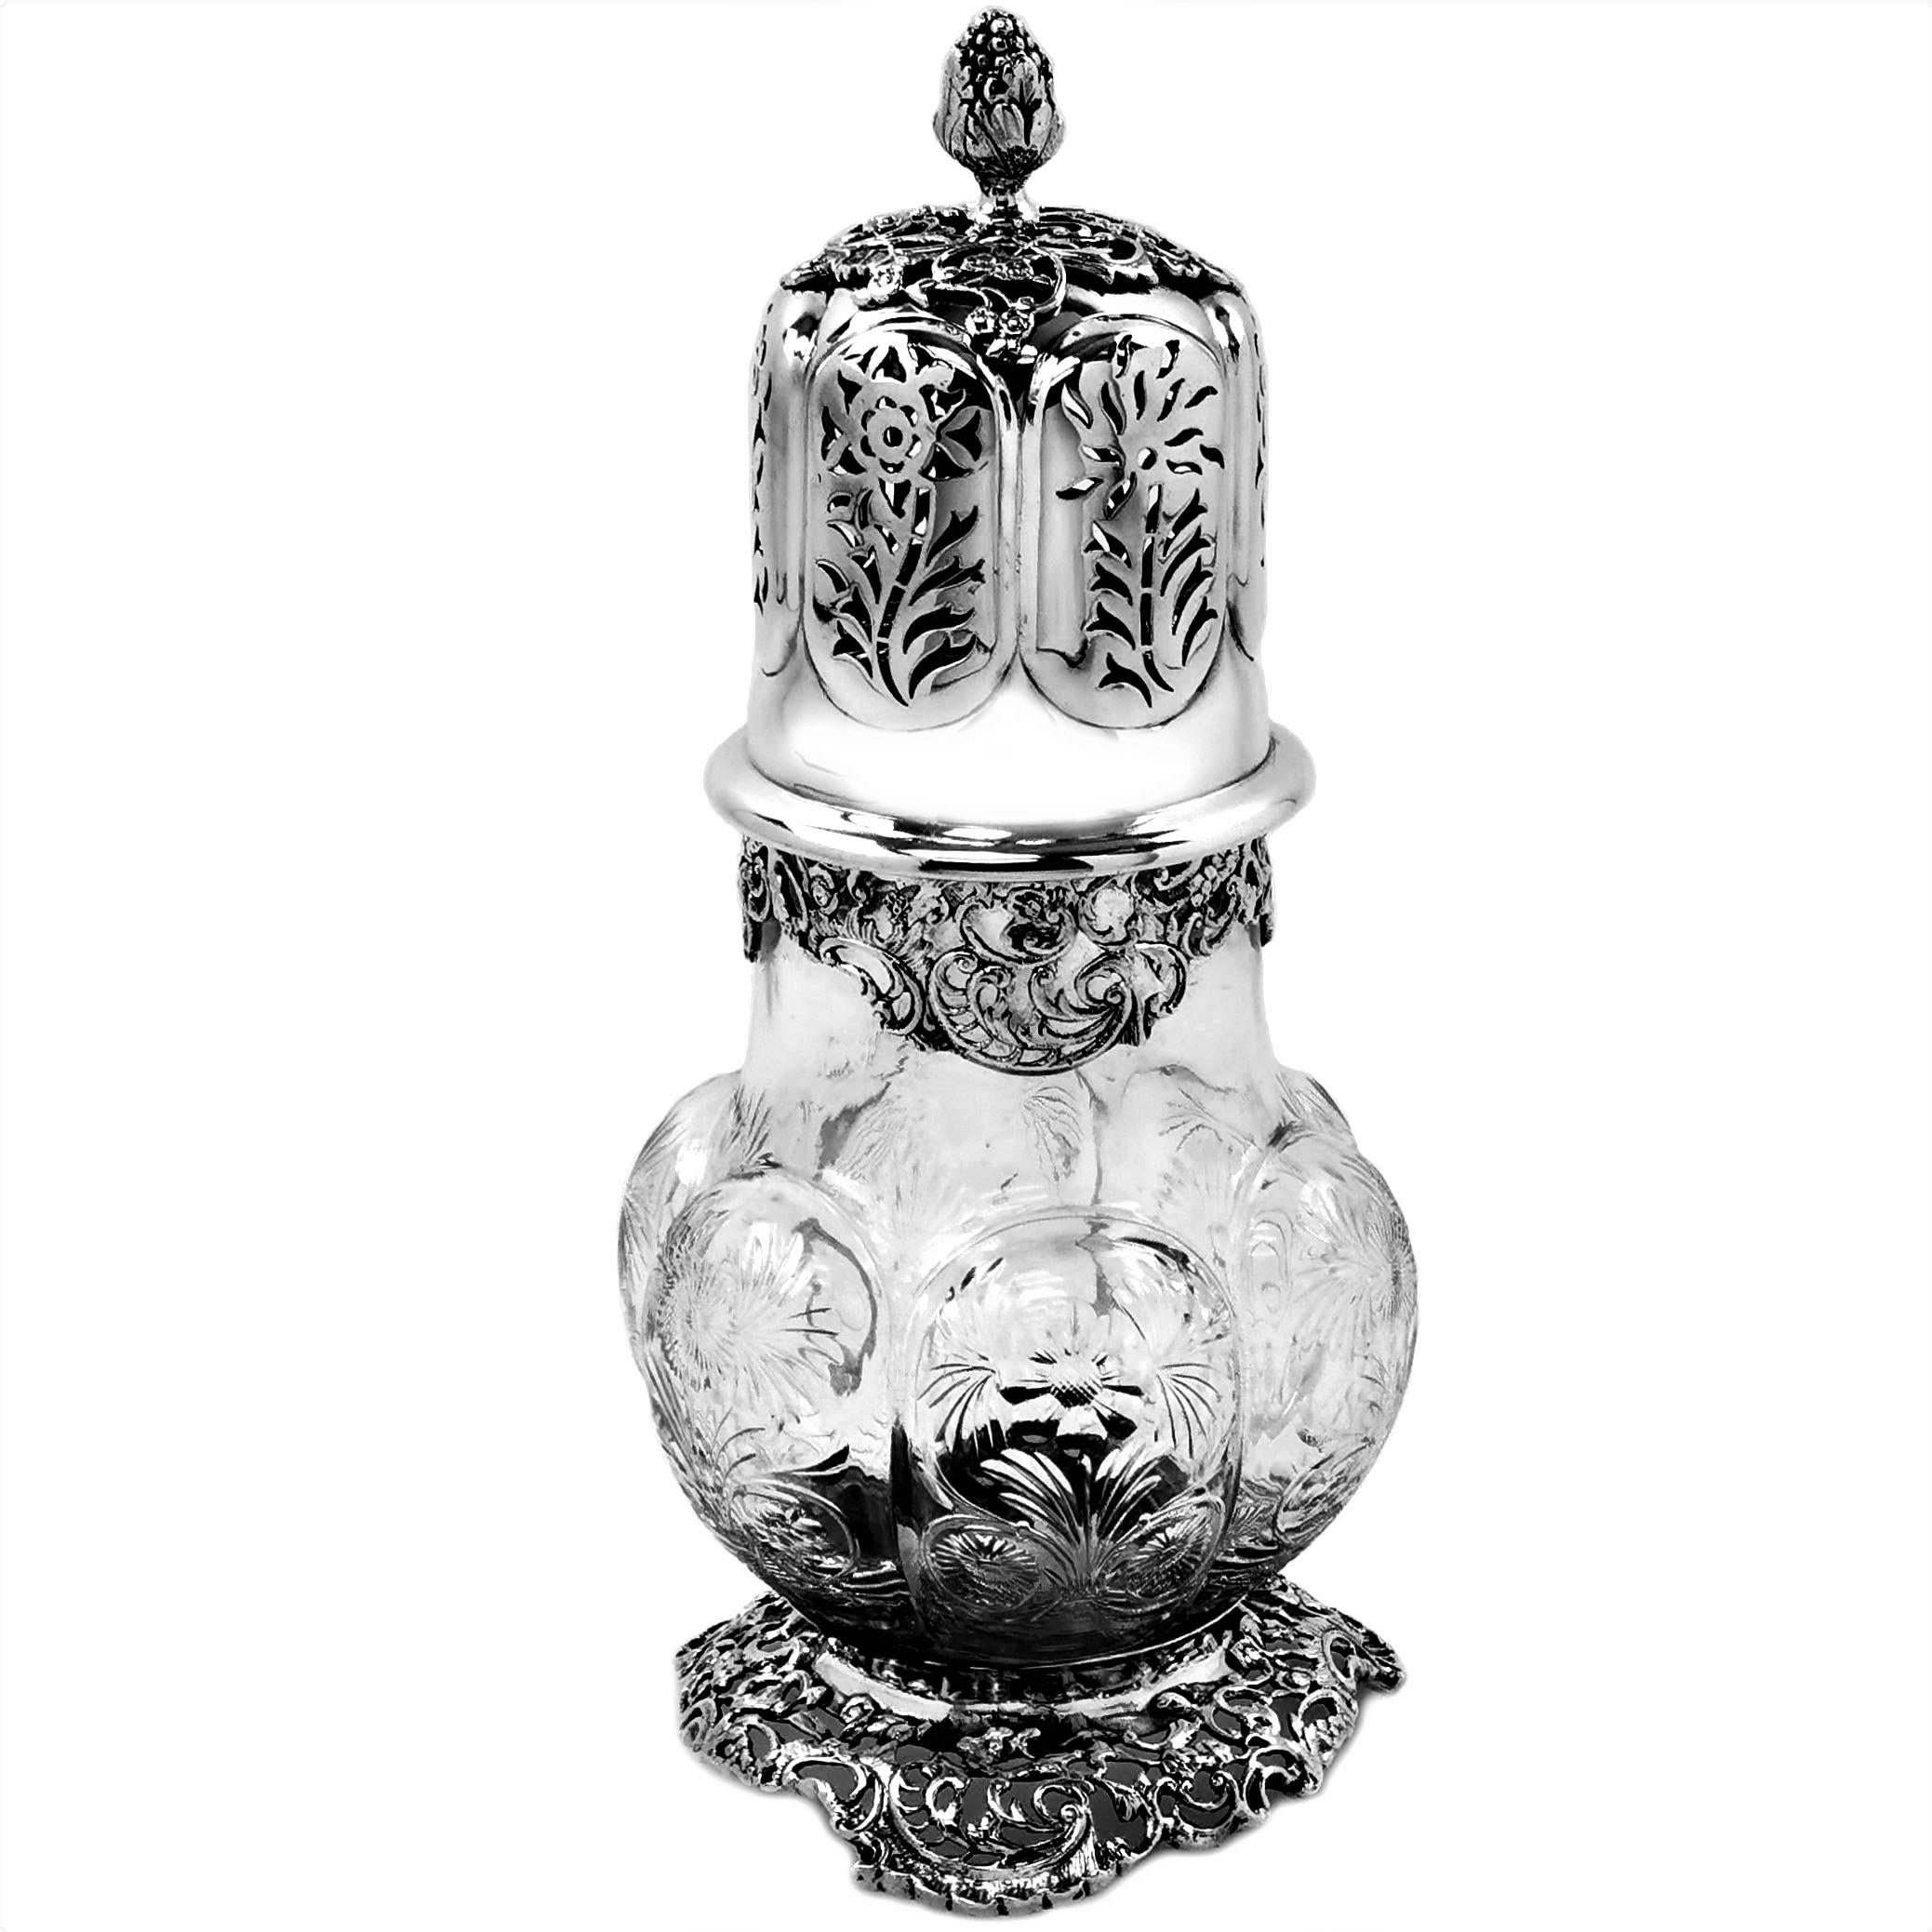 A beautiful Antique Edwardian Silver Mounted and Glass Caster. The Cut Glass body of the Caster features detailed floral images on each of the lobed panels. The Caster stands on a three sided pieces and chased foot , the patterns of which are